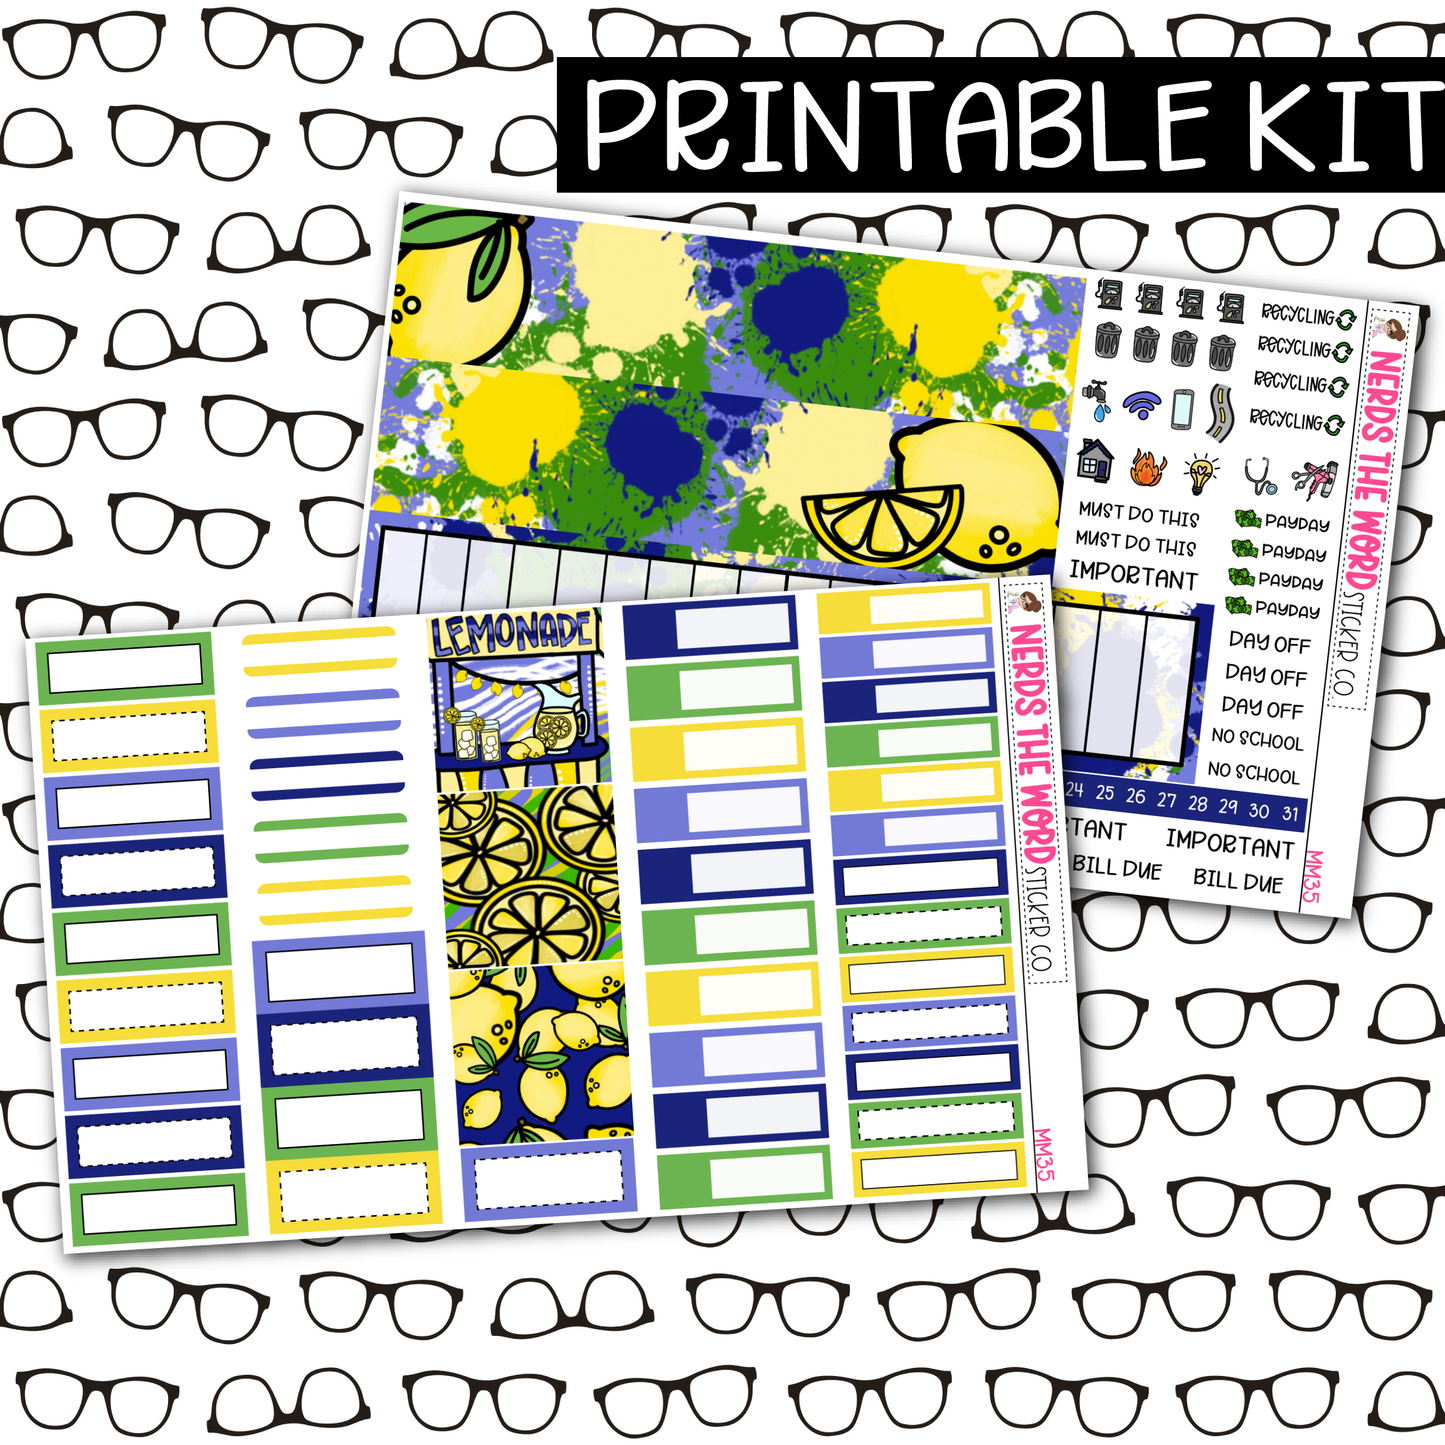 PRINTABLE Lemonade Monthly Kit - Choose your Size